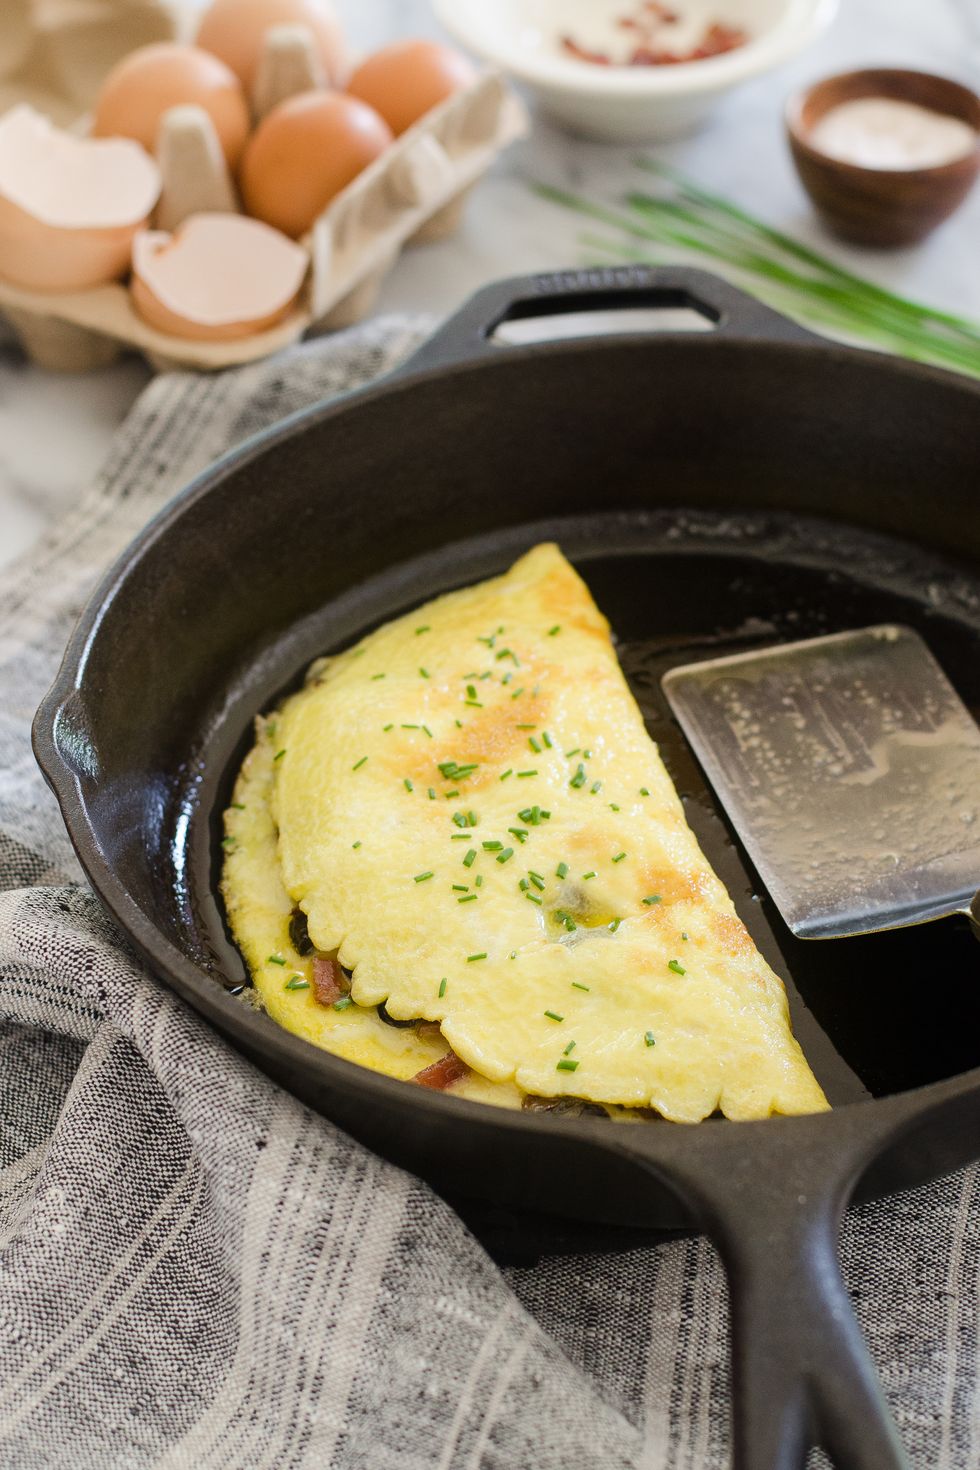 My favorite pan for cooking the difficult French omelet for my